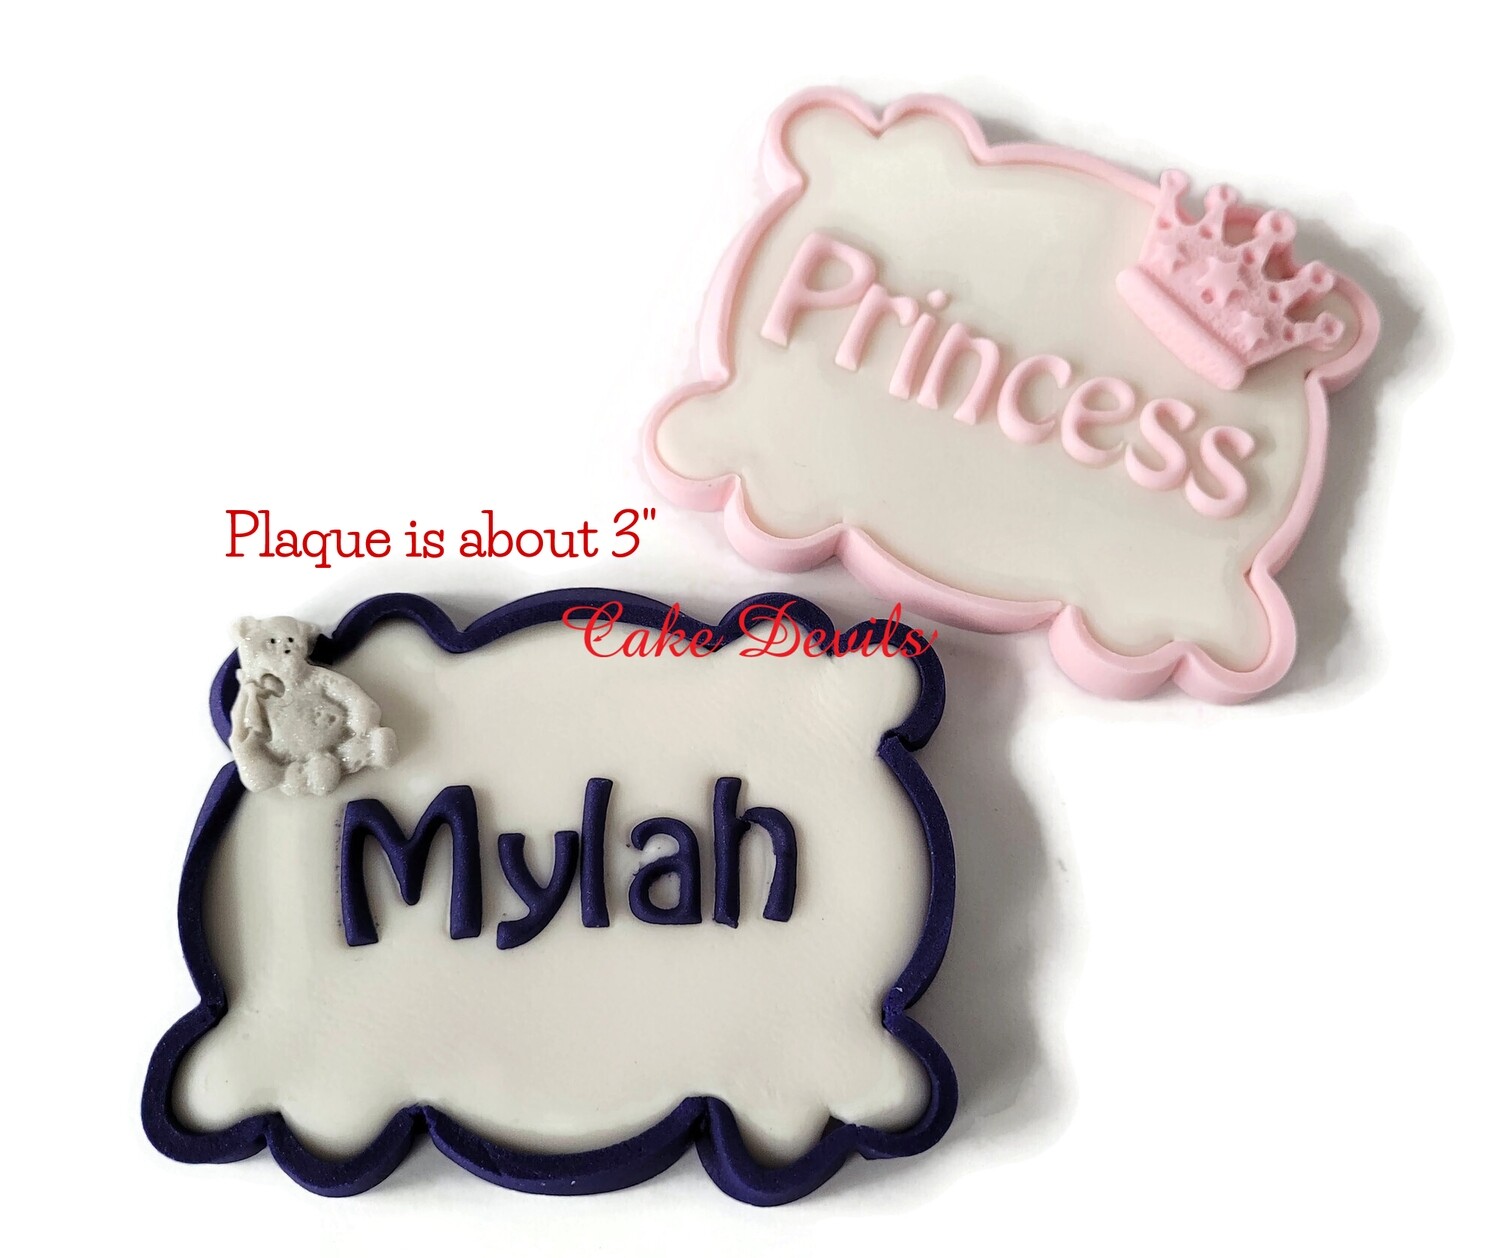 Personalized Name Plate Cake Topper, Fondant Plaque Sign for cake with decoration